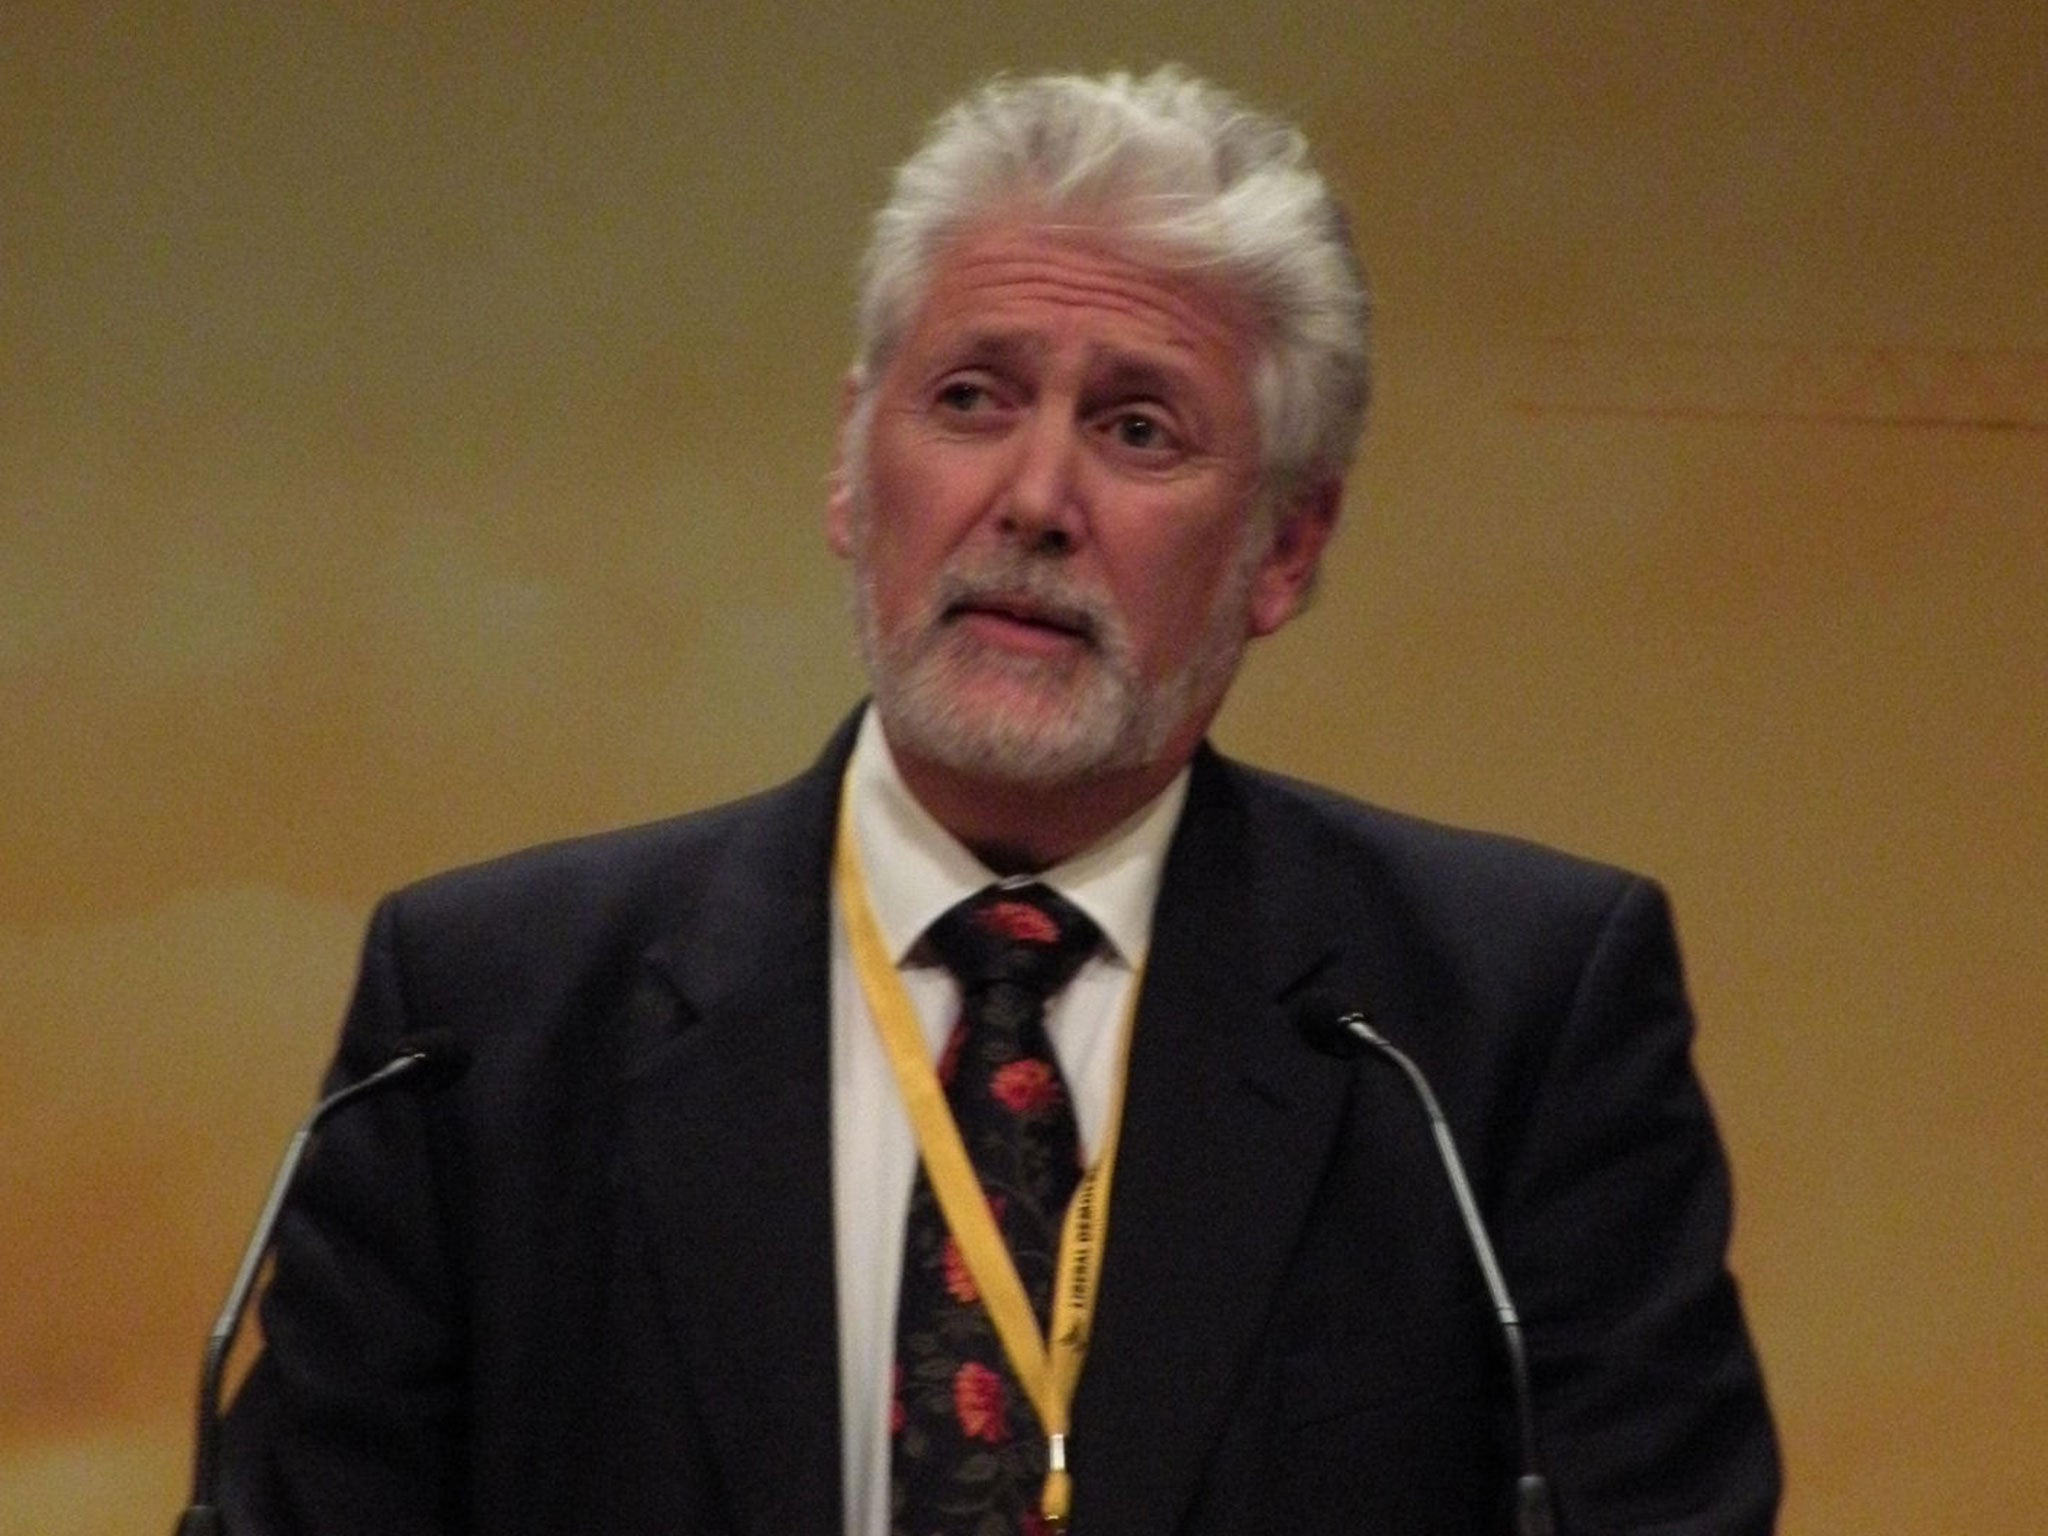 Lib Dem peer Paul Strasburger has been accused of accepting an illegal donation of £10,000